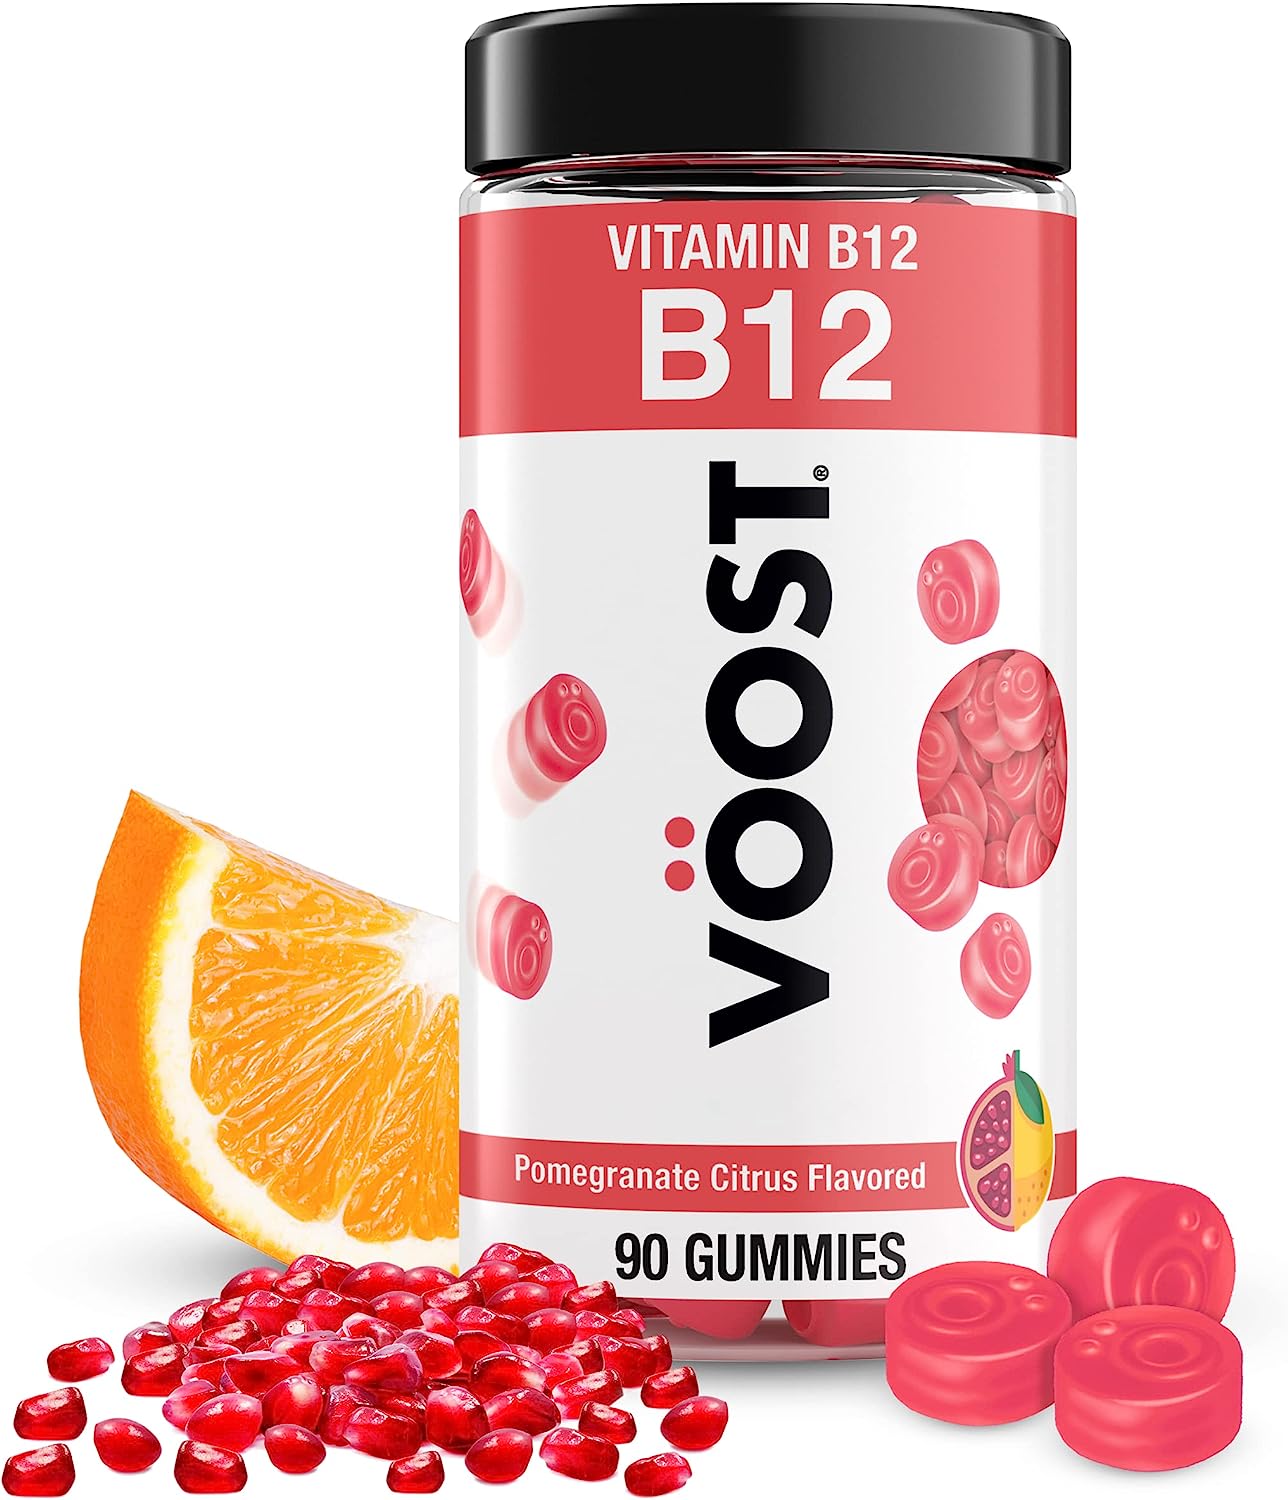 Voost, Vitamin B12 Gummies, Supplement with 500mcg Vitamin B12 for Energy Support at the Cellular Level*, Adult Chewable Vitamin, Pomegranate Citrus Flavored, 30 Day Supply - 90 Count